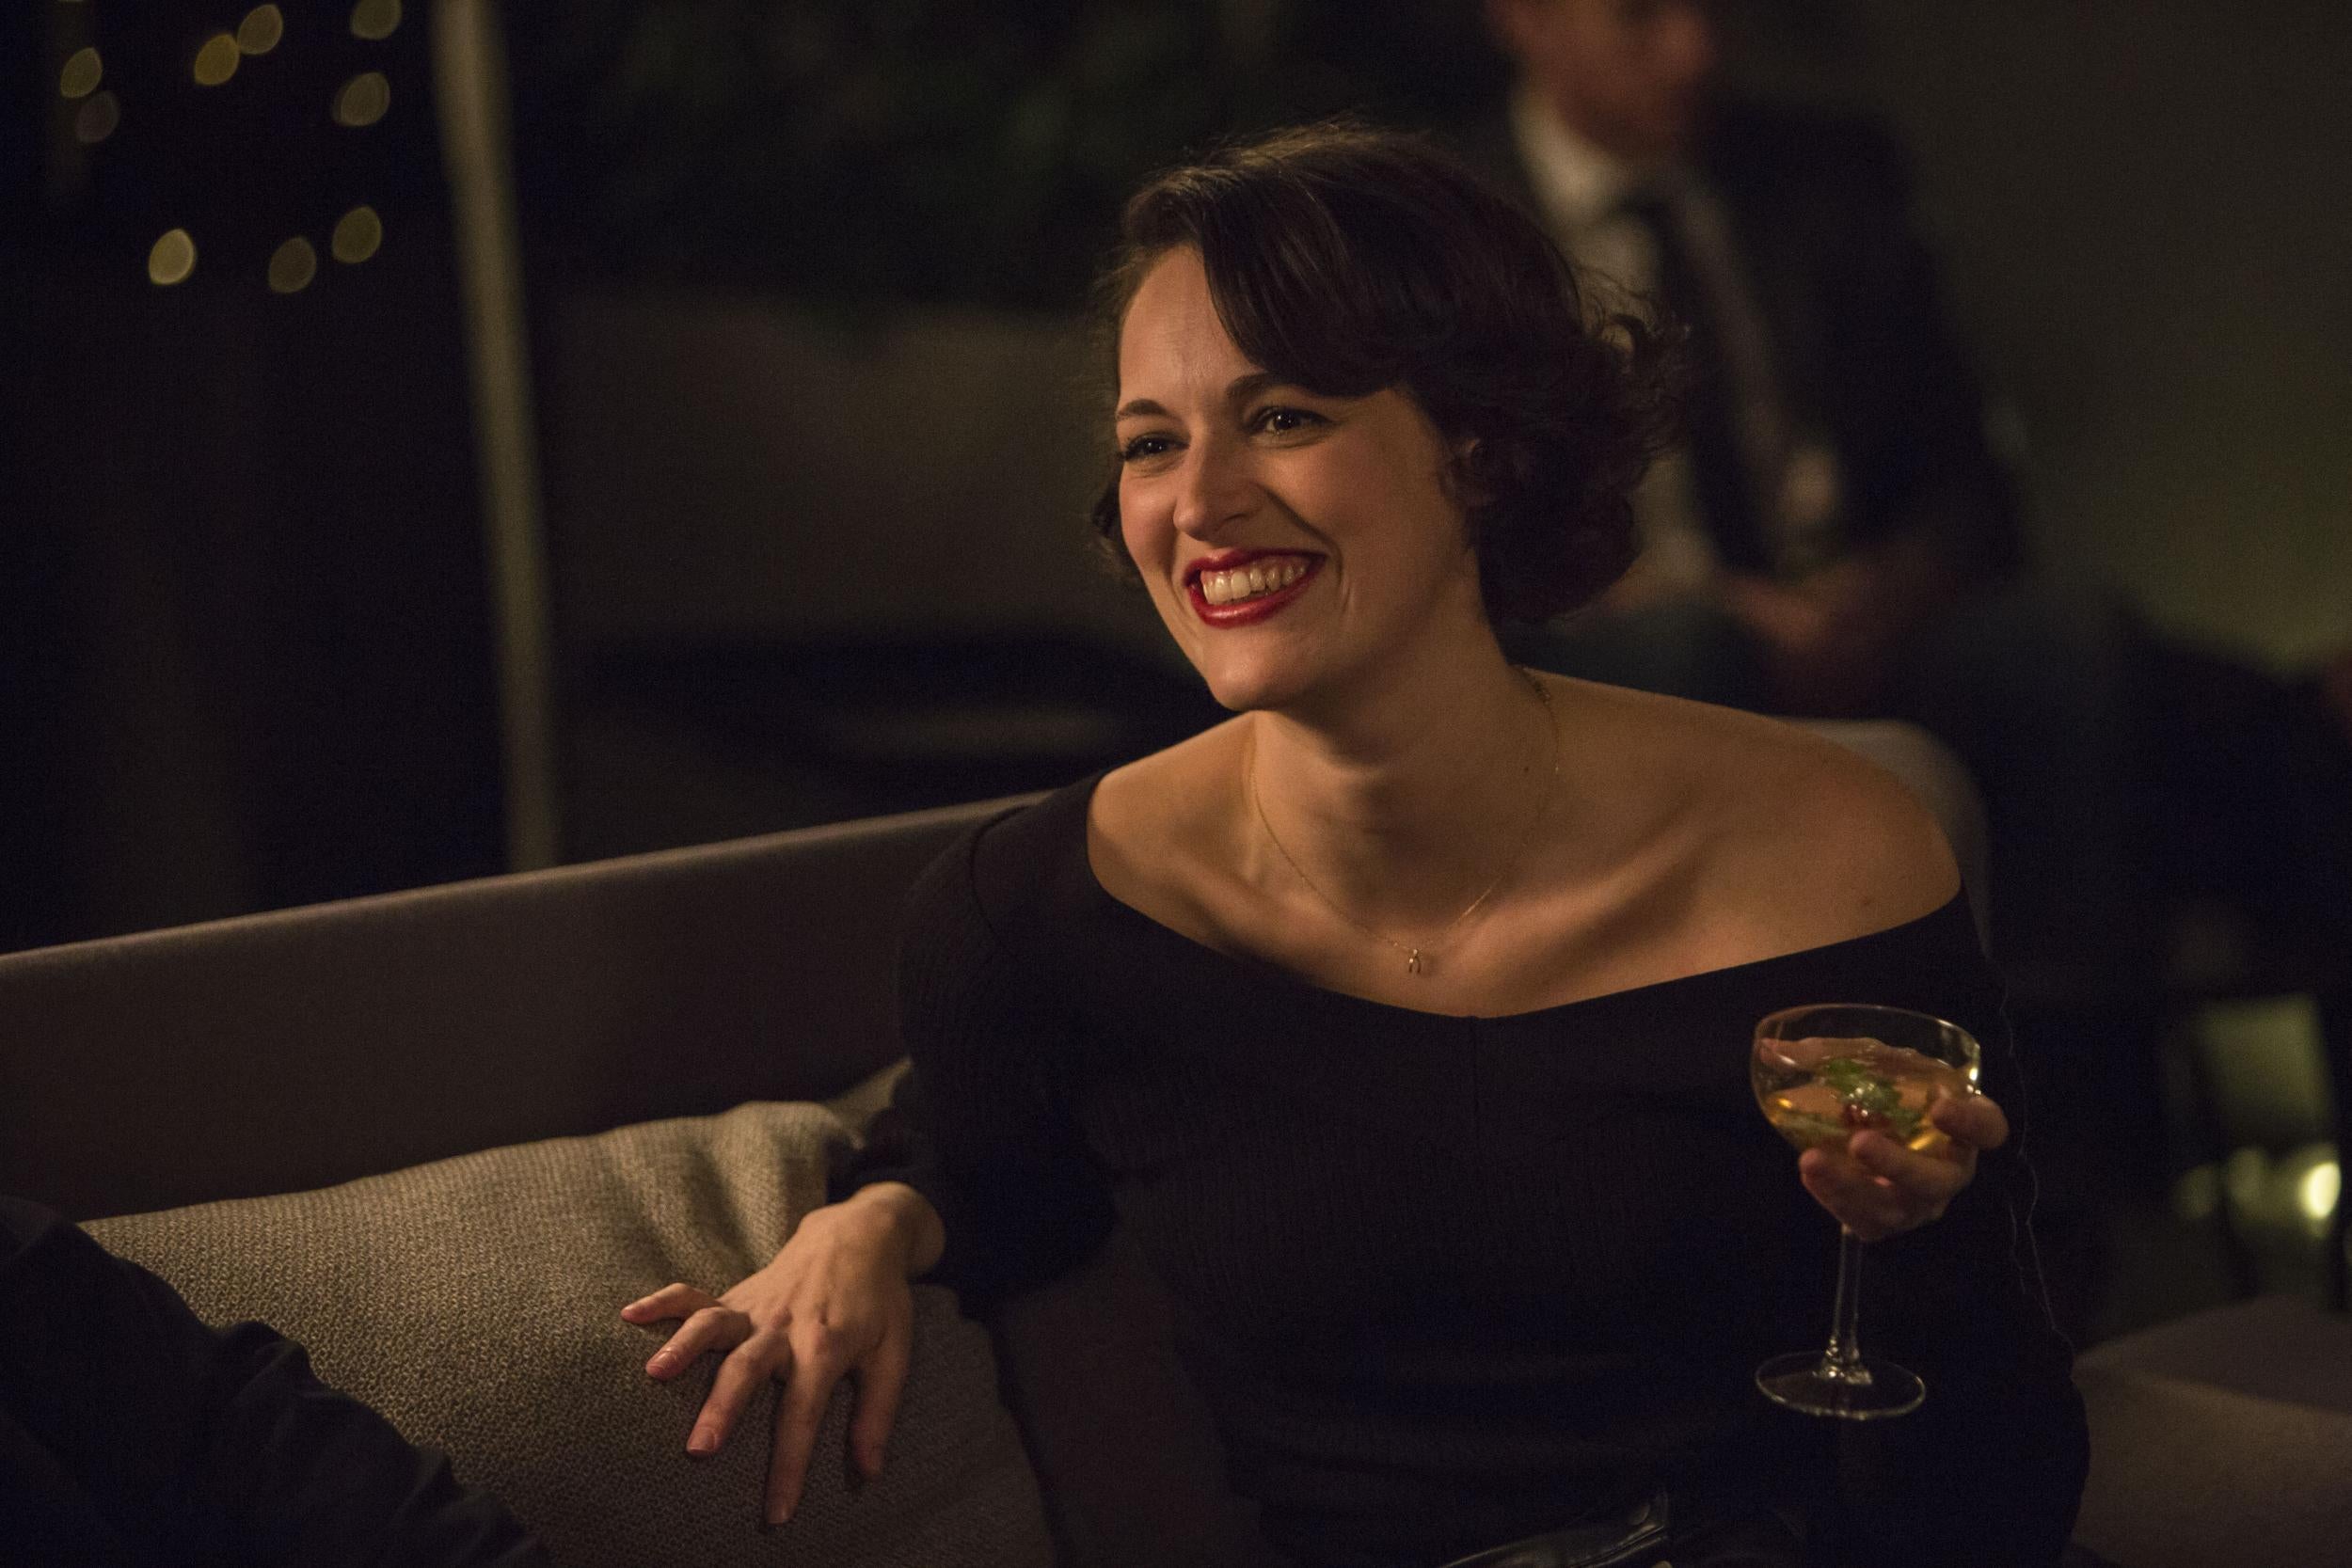 Anti-heroine: Fleabag allows women on TV to be flawed, relatable, contradictory